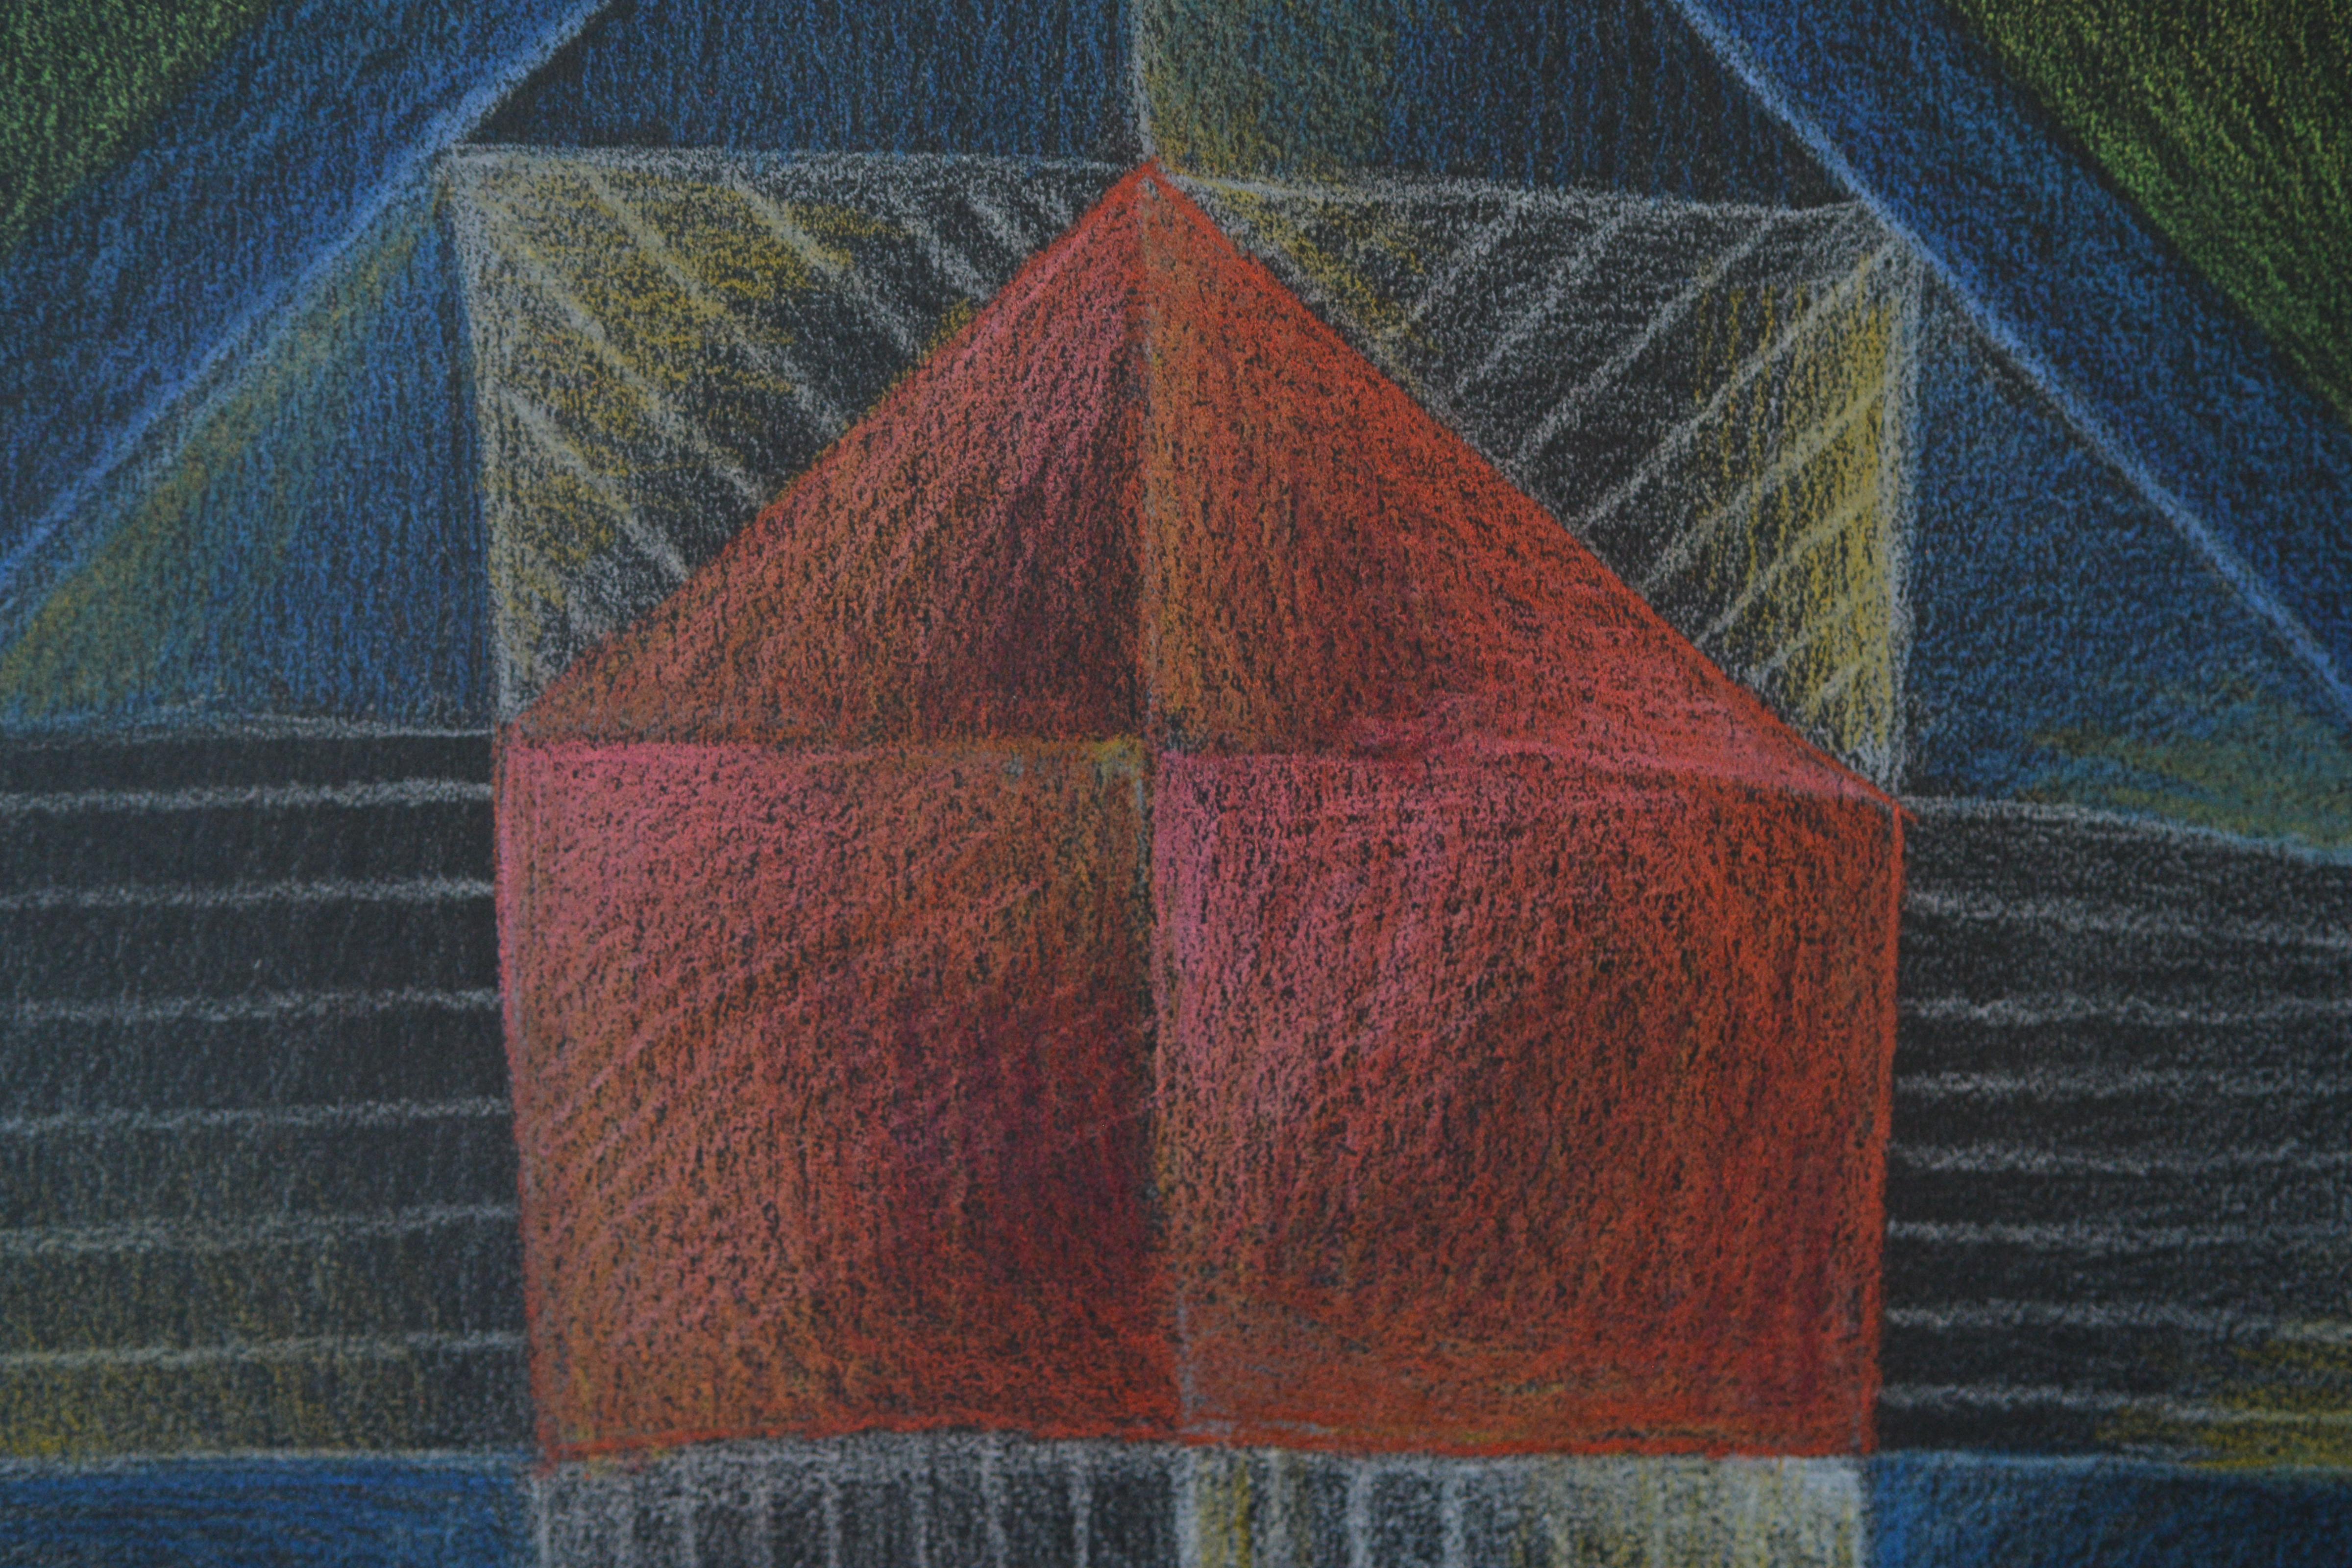 Opening Houses on Black 5, 2022. Coloured pencil on black paper, 20 x 20cm

Nicky Marais (b. 1962) is a Namibian artist, educator and activist. Marais is well-known for her abstract artworks created using a personal vocabulary of abstract forms and